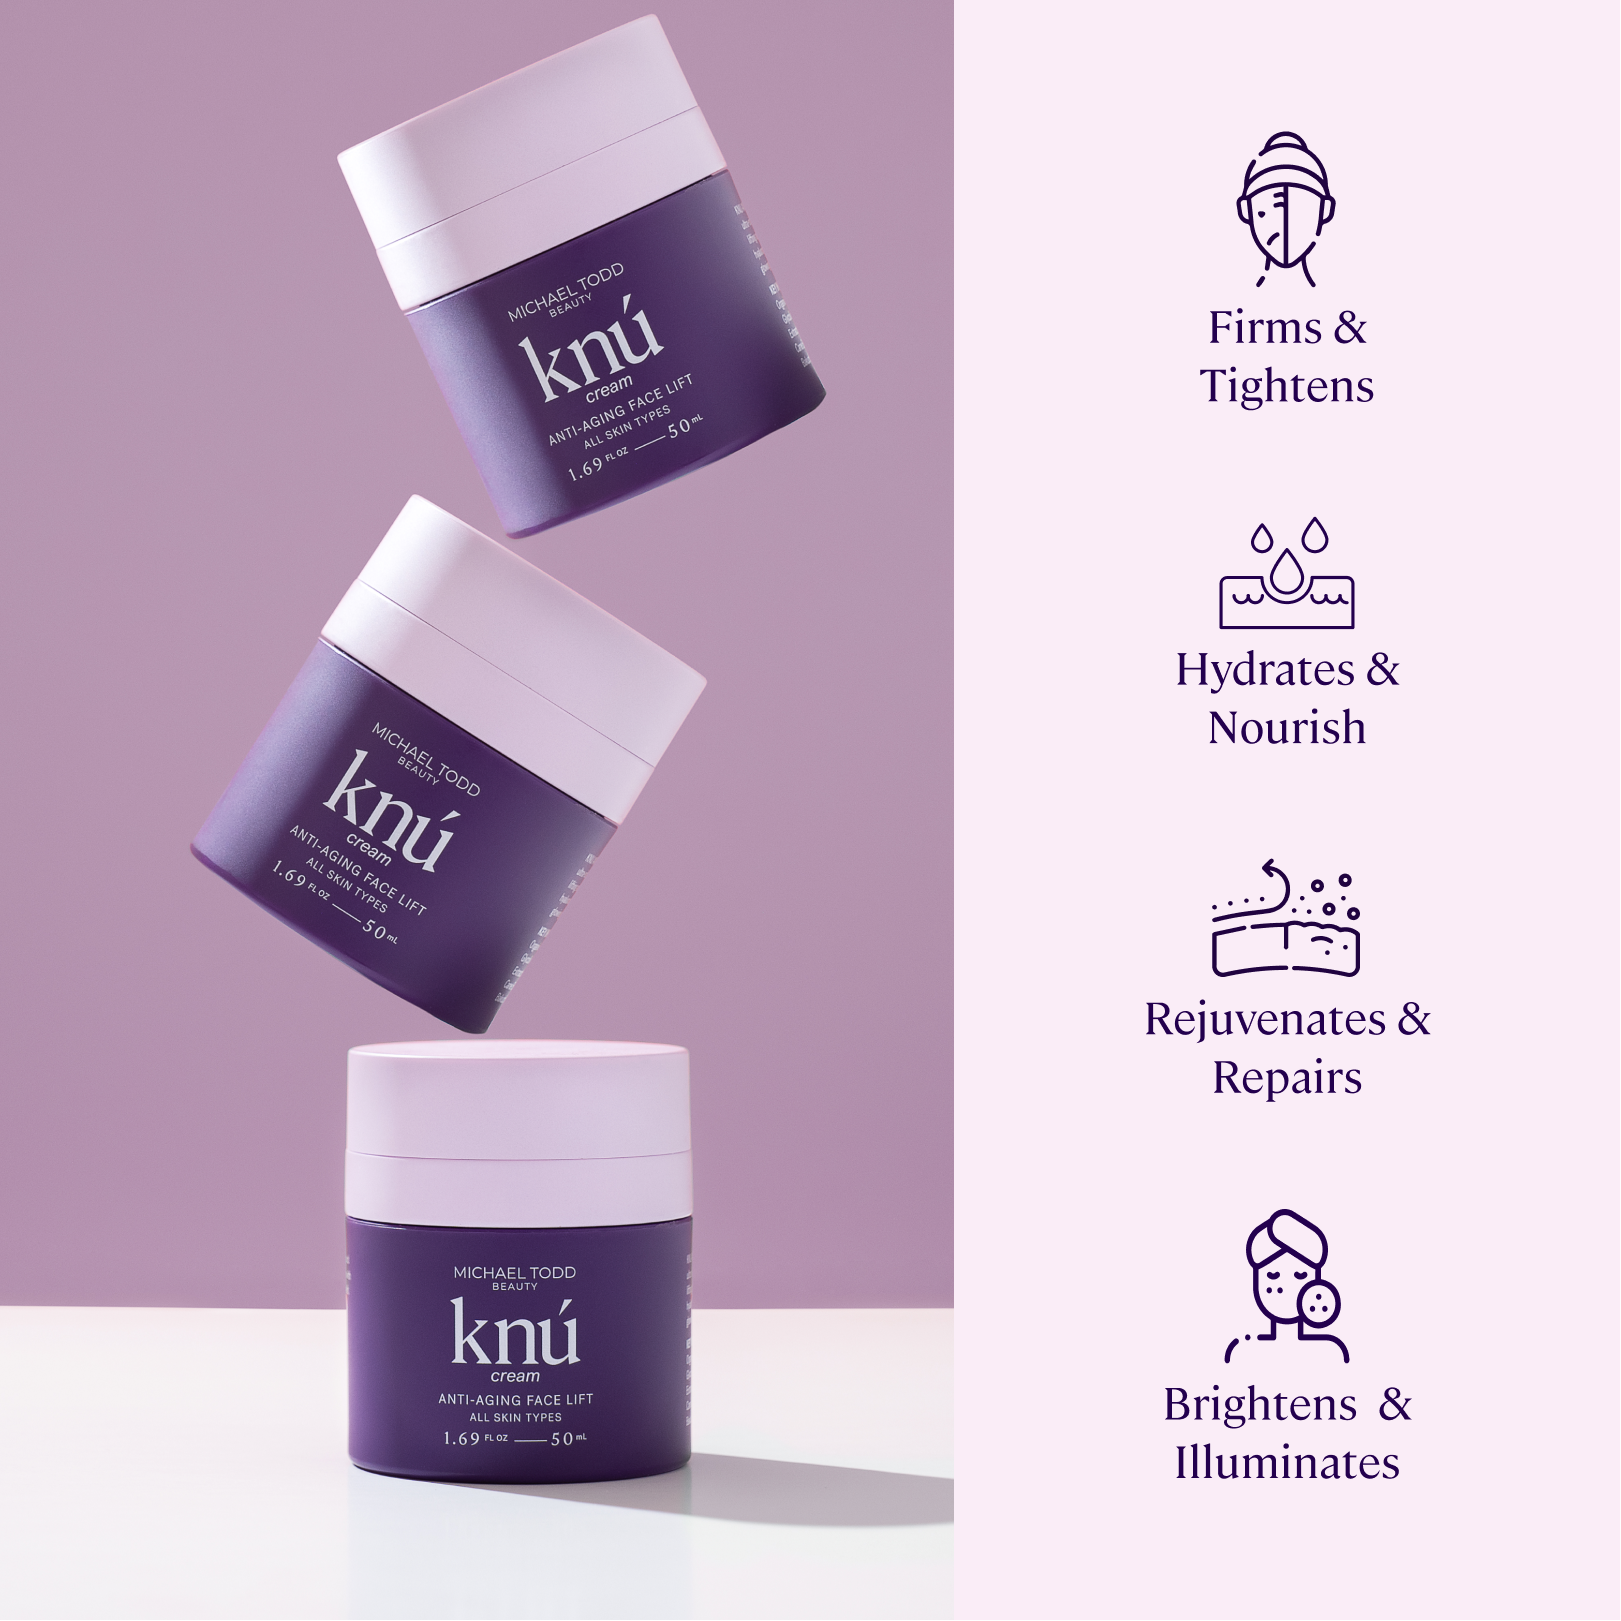 Three jars of The Knú Ageless Duo serums on a purple background by Michael Todd Beauty.